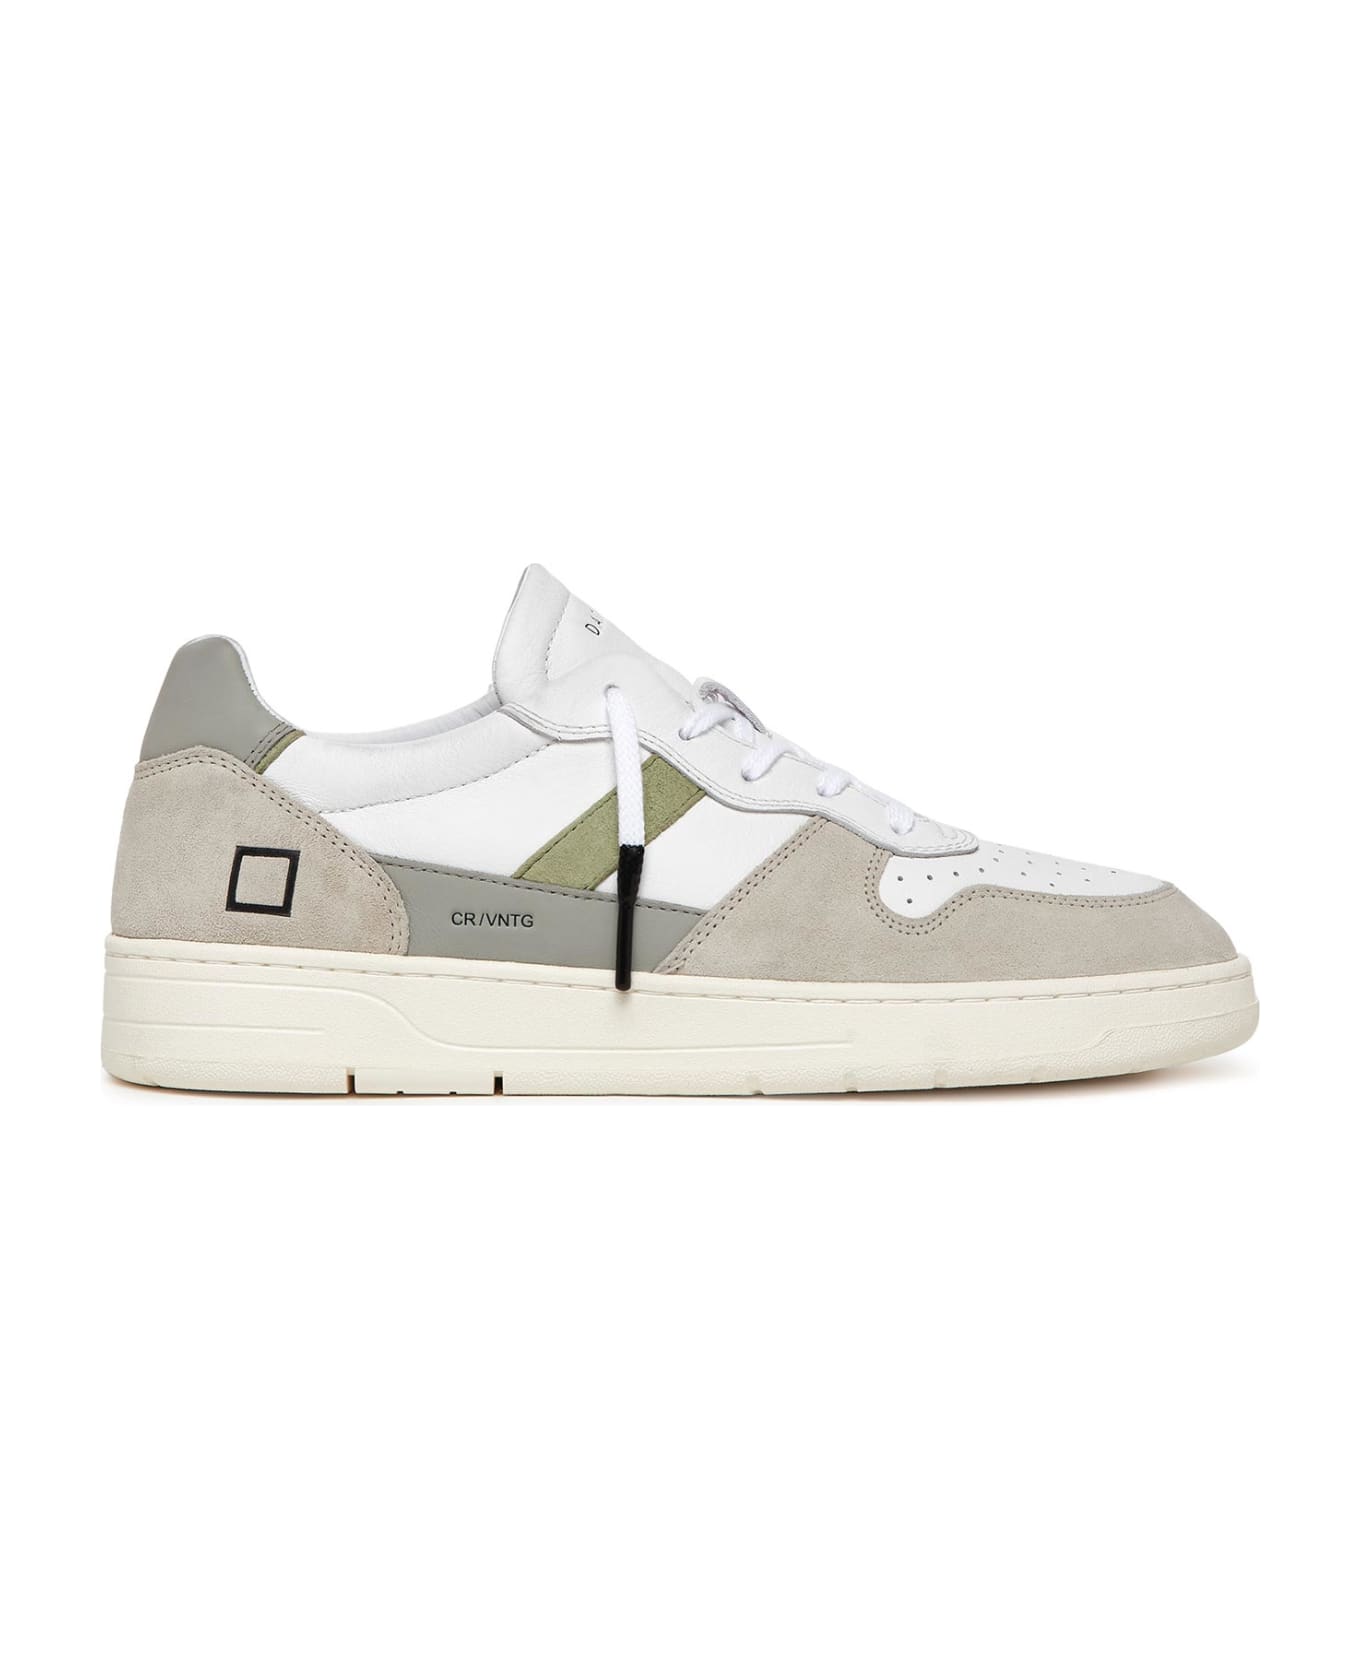 D.A.T.E. Court 2.0 Sneaker In Leather And Suede - WHITE SAGE スニーカー